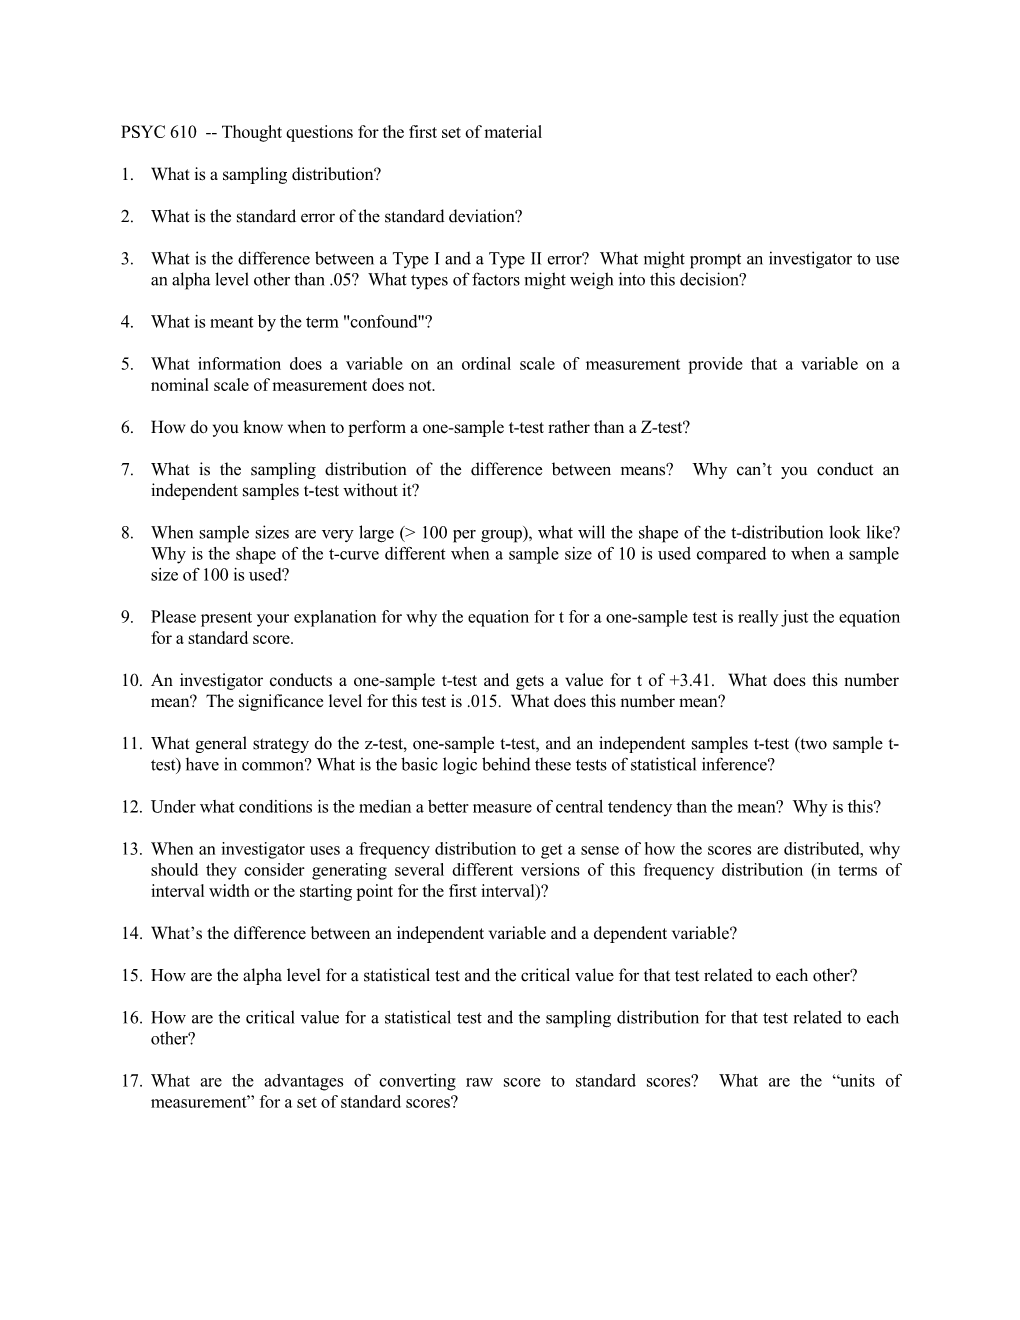 PSYC 610 Thought Questions for the First Set of Material